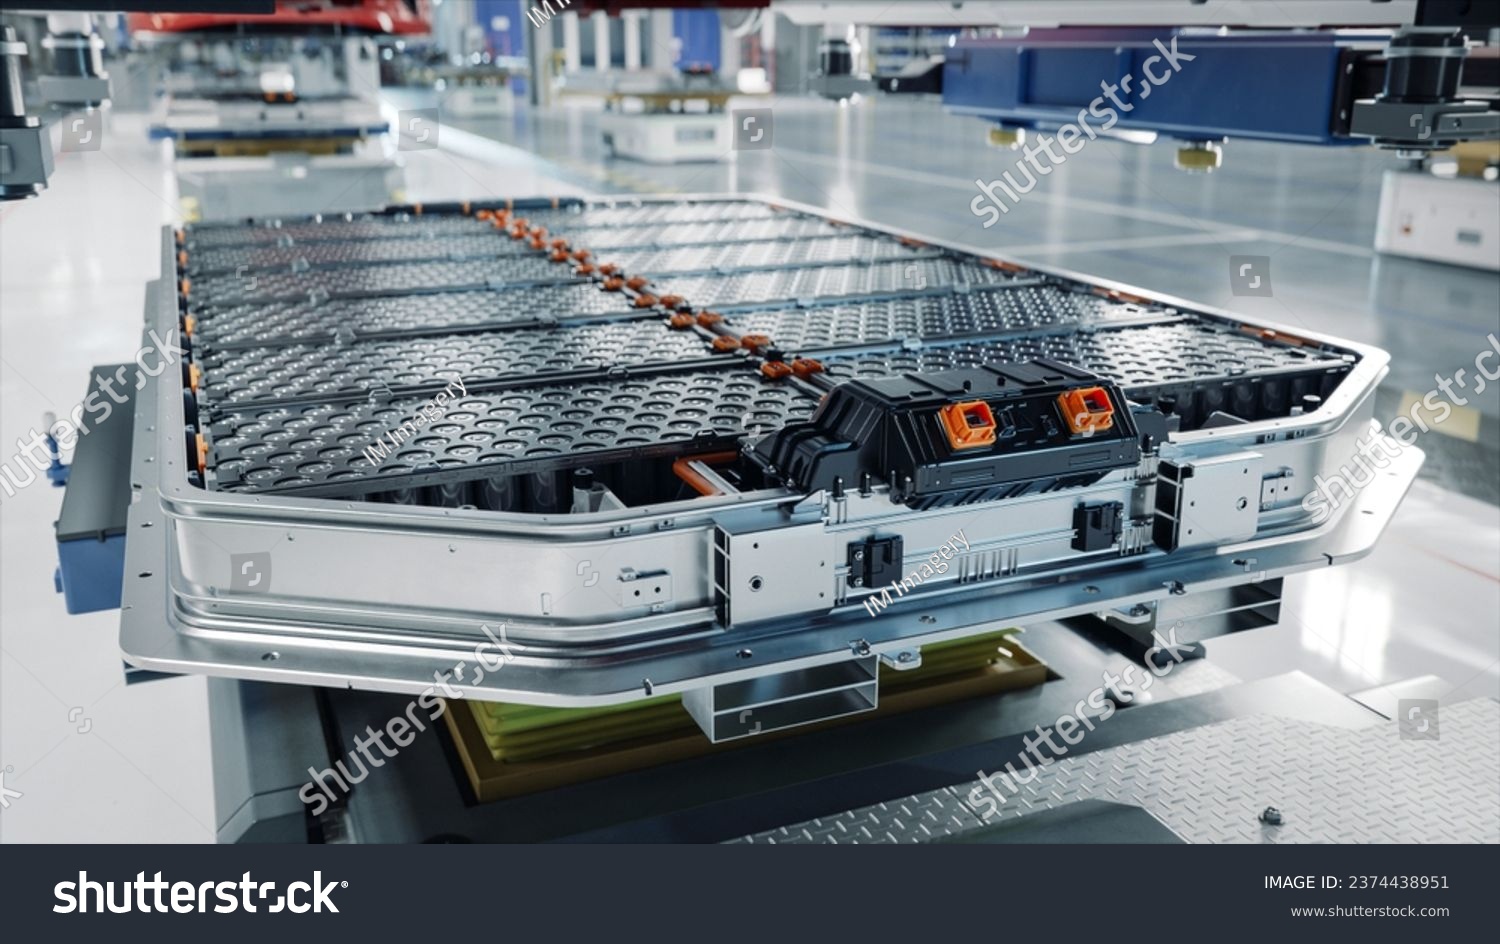 Generic EV Battery Pack on Electric Car Production Line inside Modern Factory. High Capacity Battery for Automotive Industry. Lithium-ion High-voltage Battery for Electric Vehicle or Hybrid Car. #2374438951